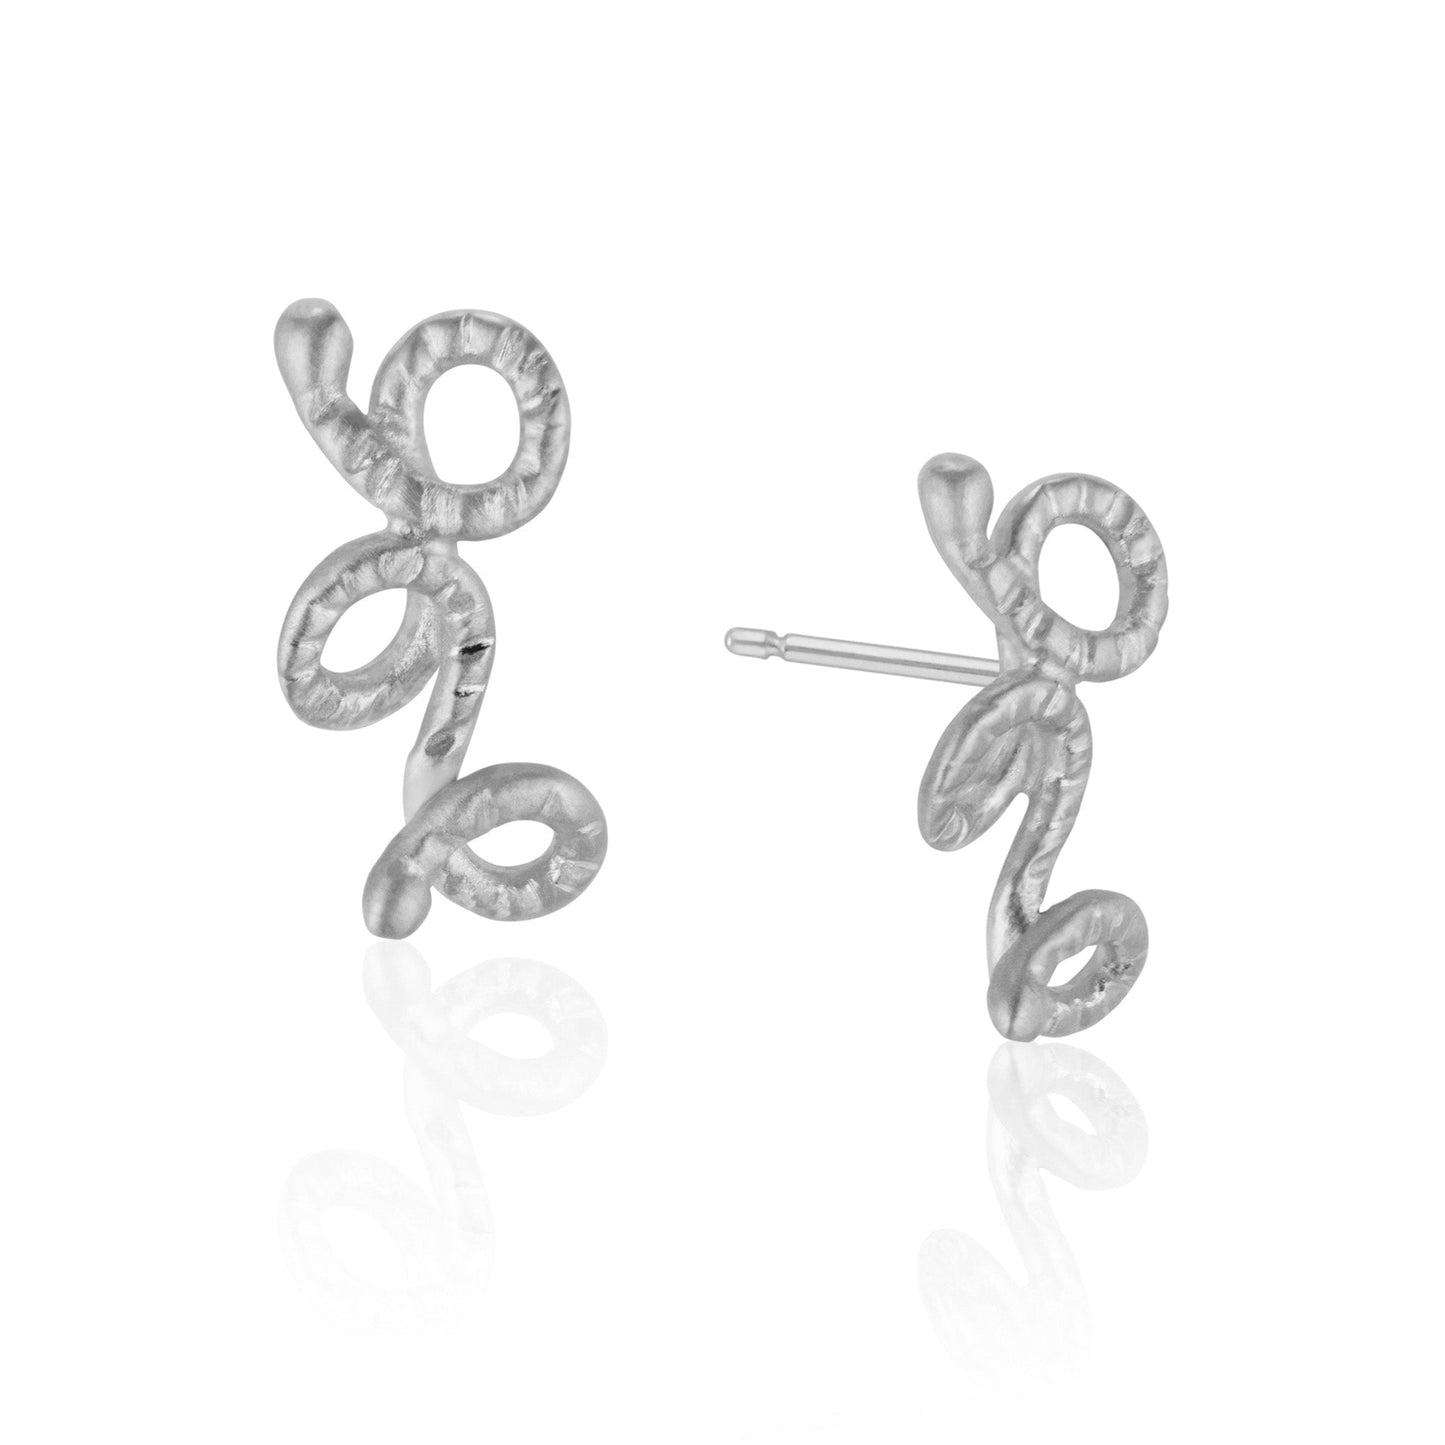 The Child Studs in Silver